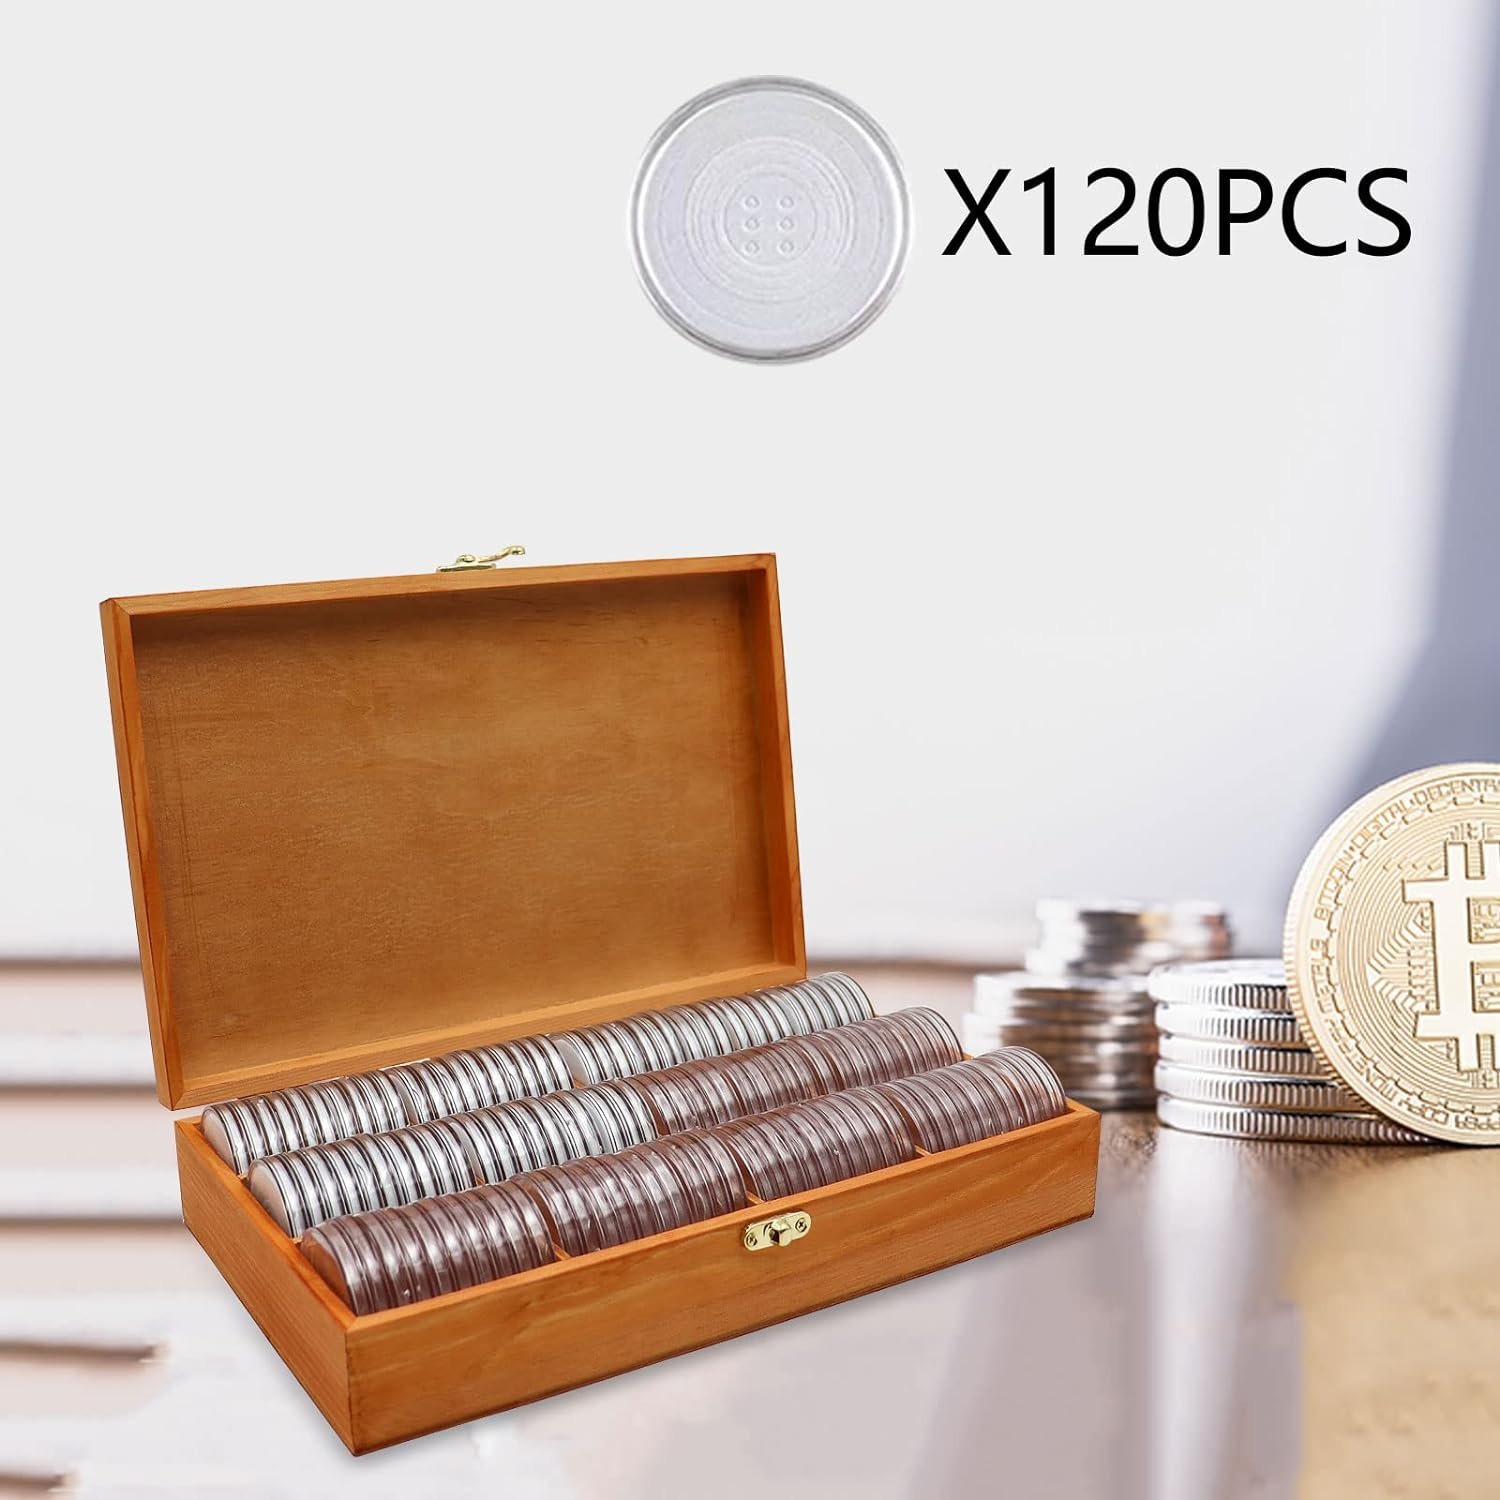 Comparing Wooden Coin Holder, Transparent Coin Capsules, and Double Row Coin Storage Box